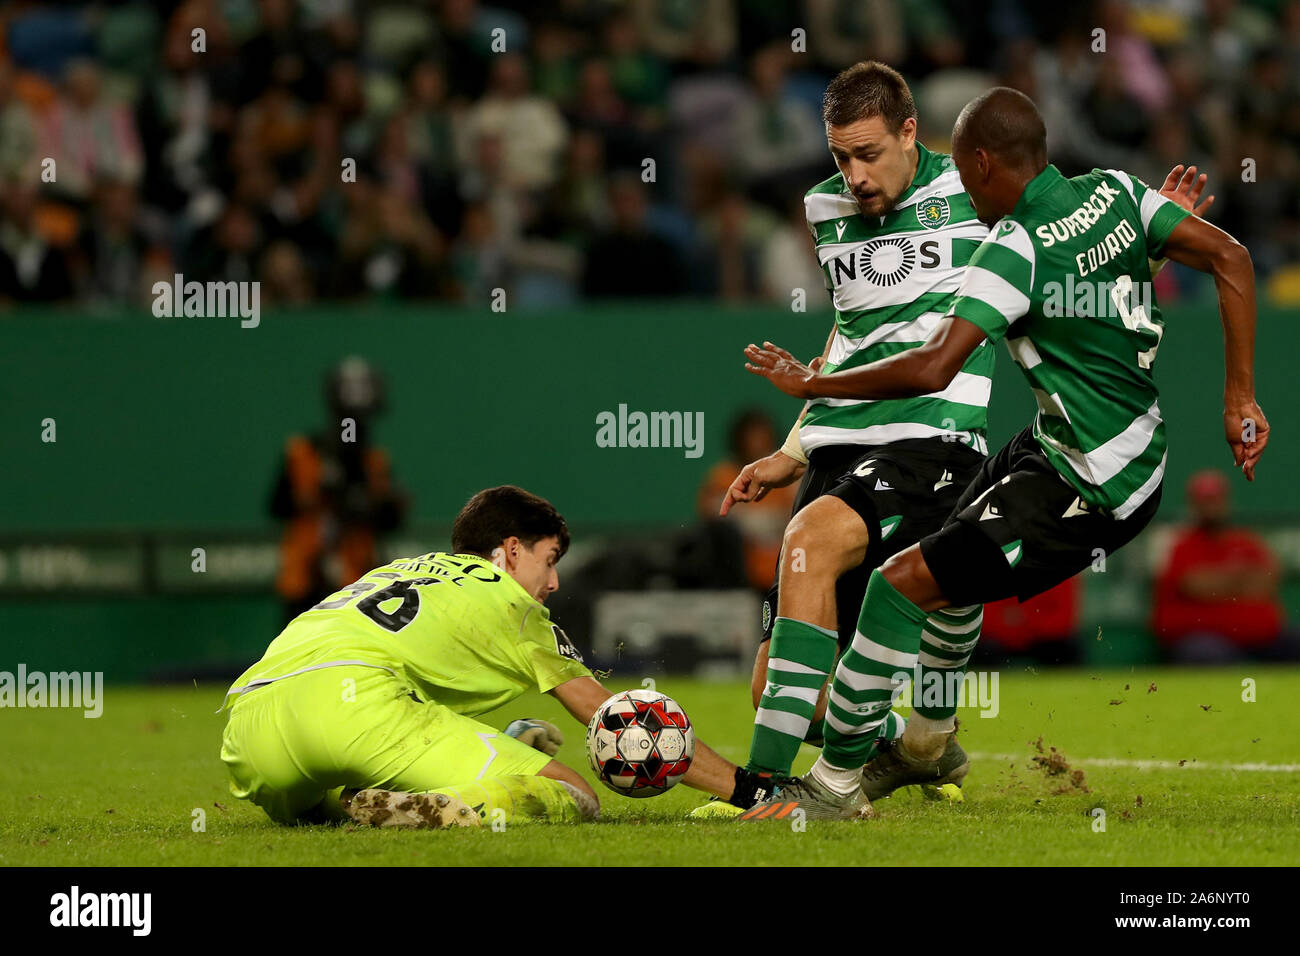 Lisbon, Portugal. 27th Oct, 2019. Sebastian Coates (C) of Sporting CP shoots to score during the Portuguese League football match in Lisbon, Portugal, Oct. 27, 2019. Credit: Pedro Fiuza/Xinhua/Alamy Live News Stock Photo